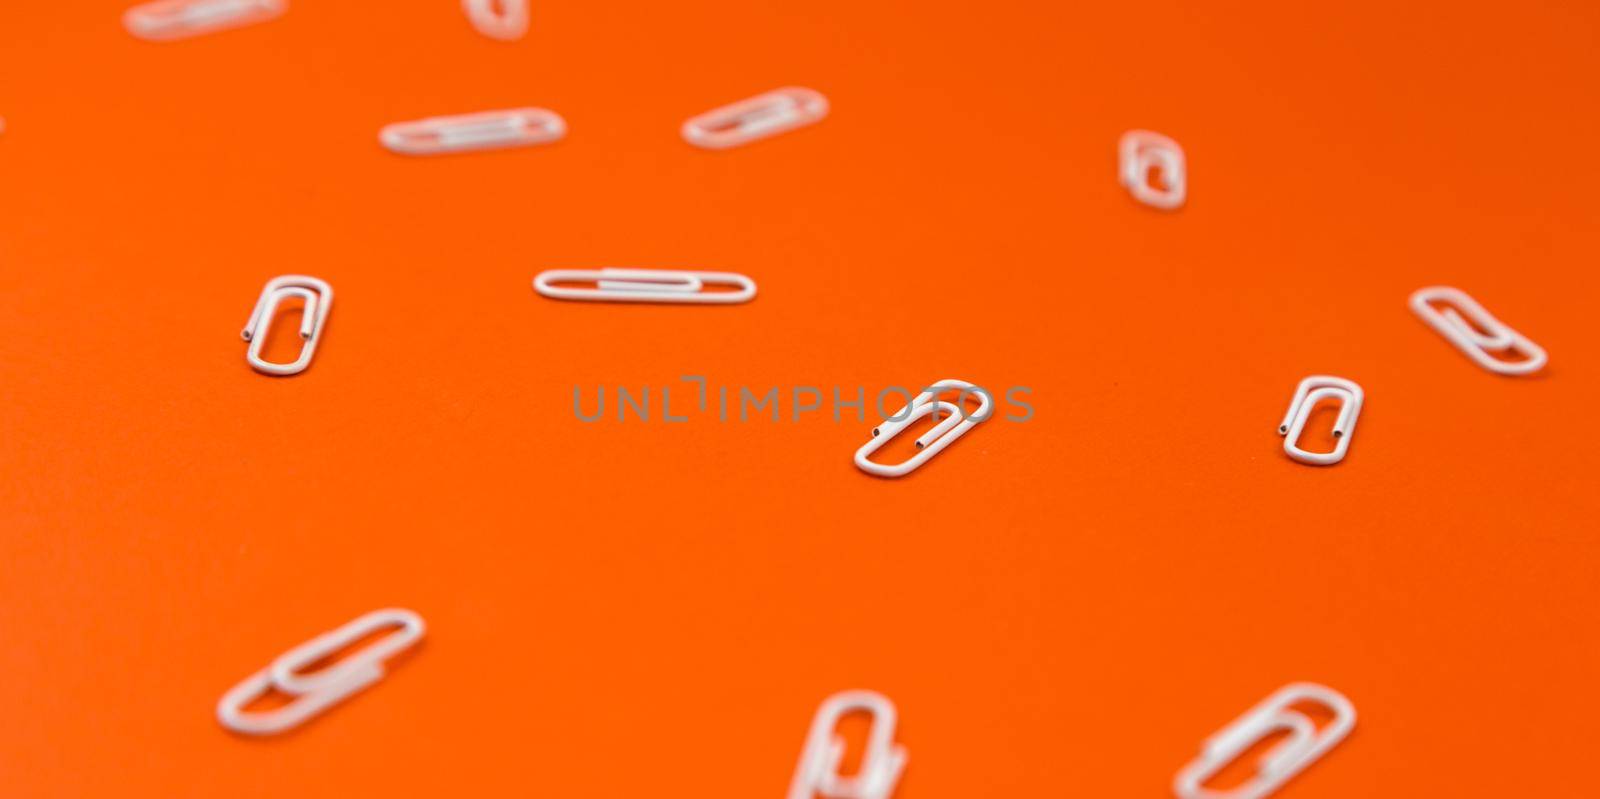 Close-up of white paper clips on a orange background. School stationery pattern